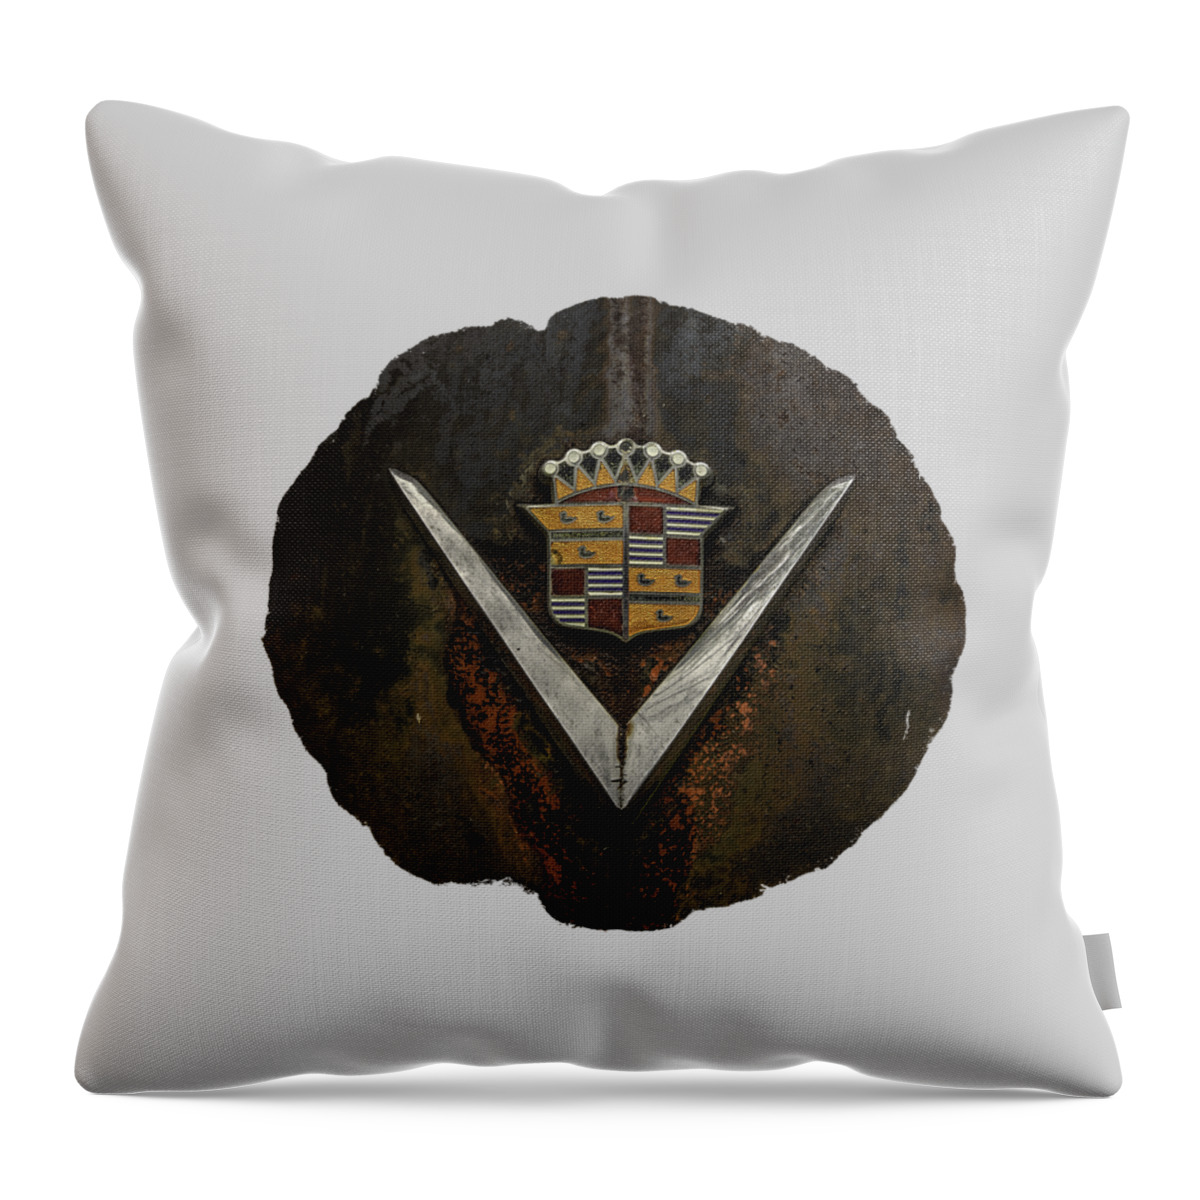 Antique Throw Pillow featuring the photograph Caddy Emblem by Debra and Dave Vanderlaan